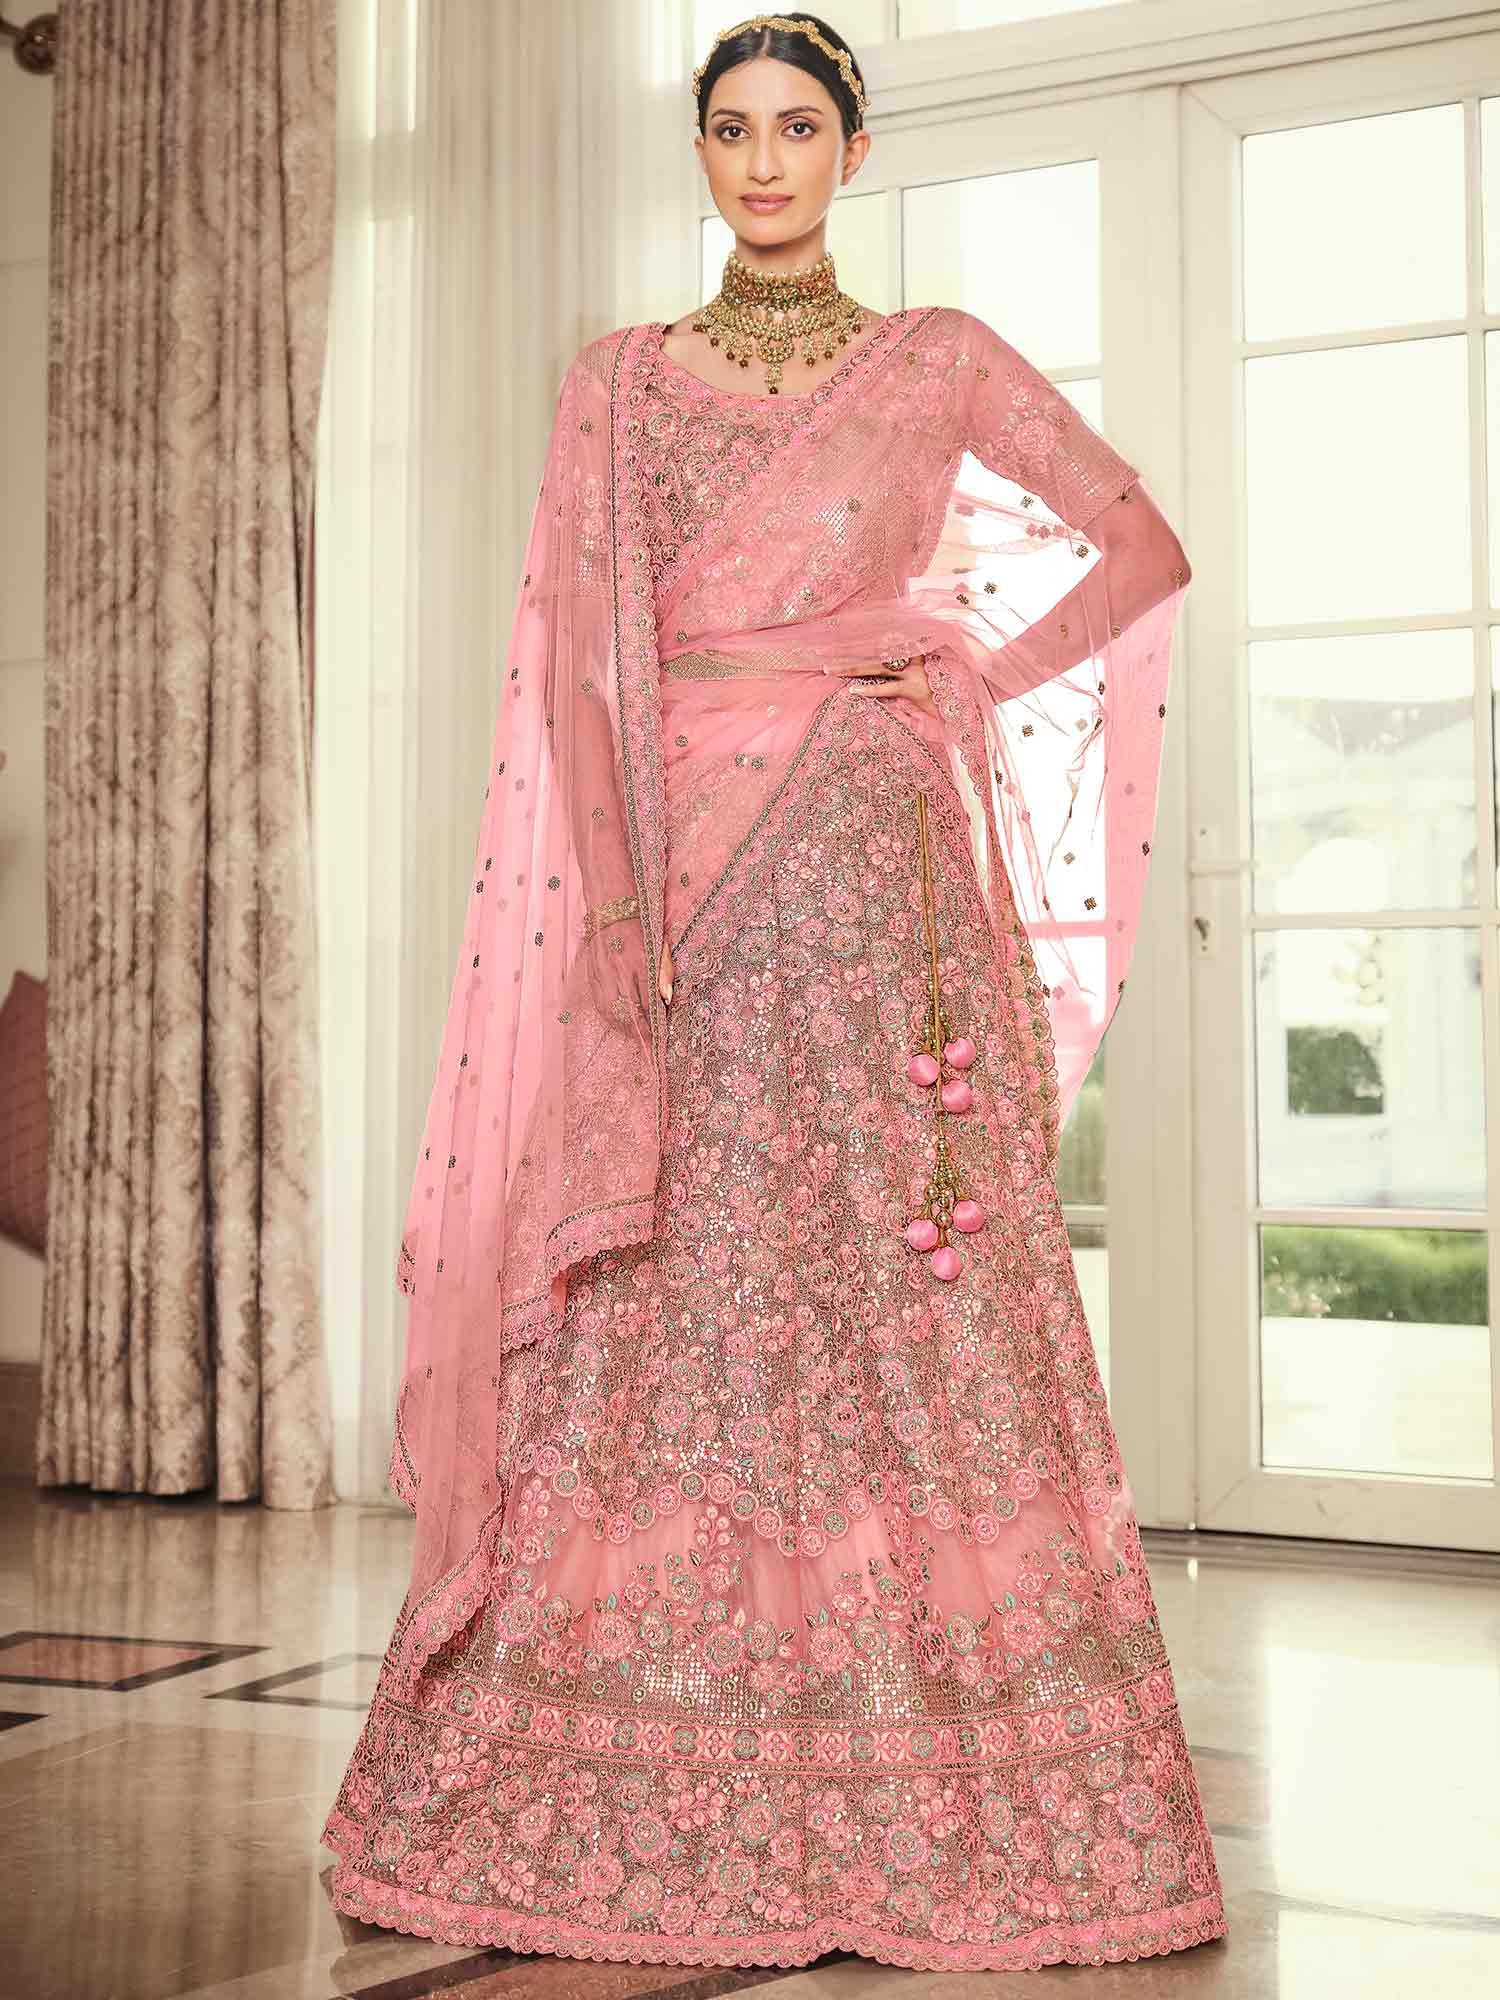 Dazzling Peach Colored Partywear Embroidered Silk Lehenga Choli